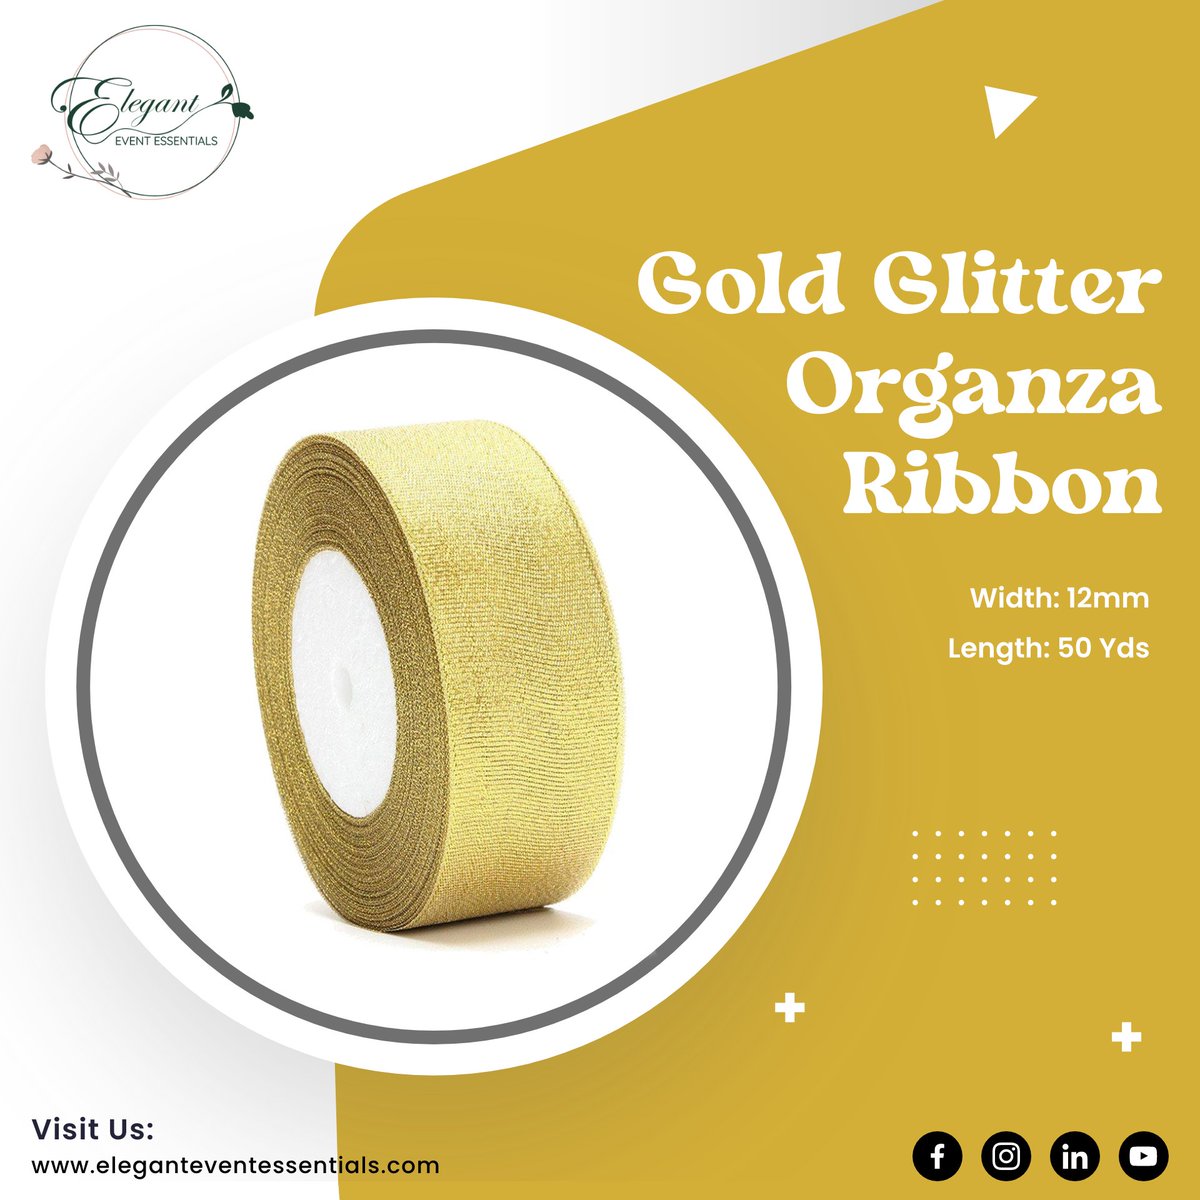 Now embellish your event and venue with minimum effort! Use our #Gold Glitter Organza #Ribbons to change your ambience into an exotic work. Show your guests your #creative side with our versatile Organza Ribbons

#ElegantEventEssentials #OrganzaRibbon #decoration #wedding🍸#brand